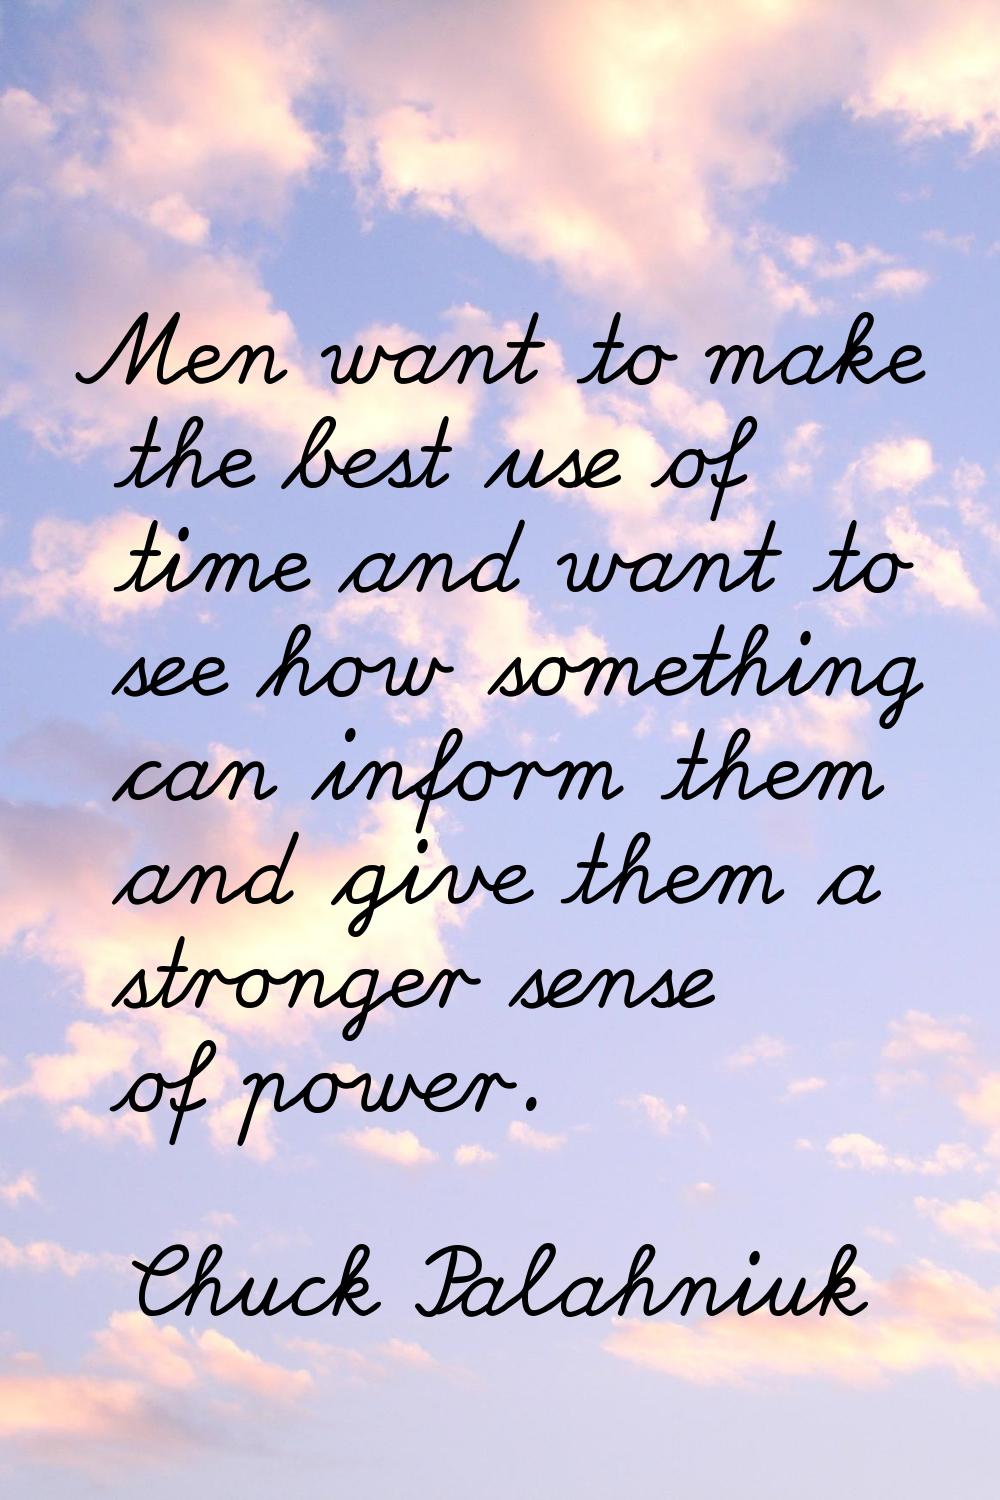 Men want to make the best use of time and want to see how something can inform them and give them a